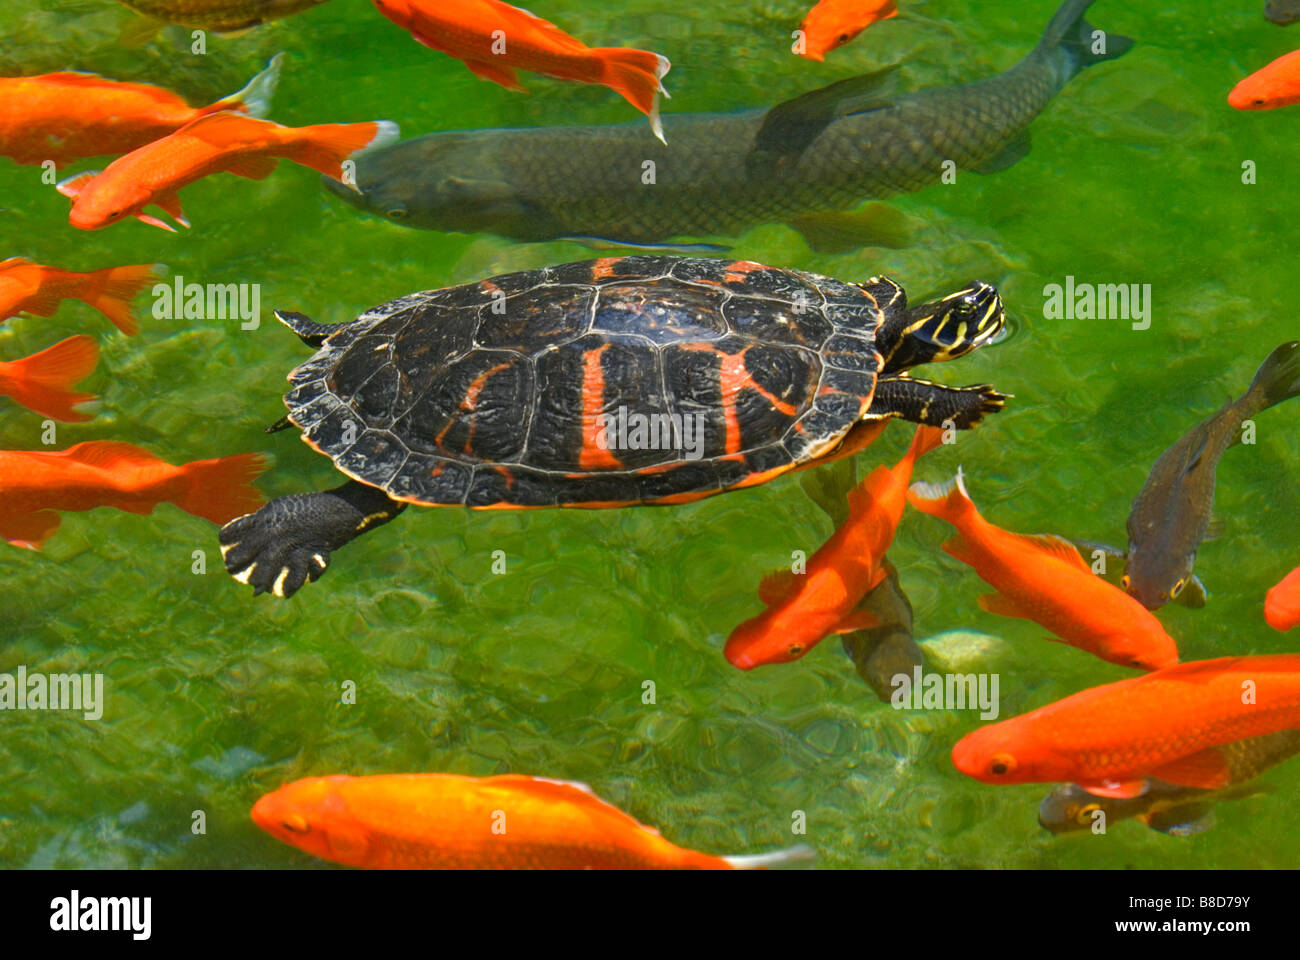 Red Belly, Red-Bellied Turtle swimming in pond with Aka Muji variety of Koi fish, Colorado. (Neither are native to Colorado) Stock Photo